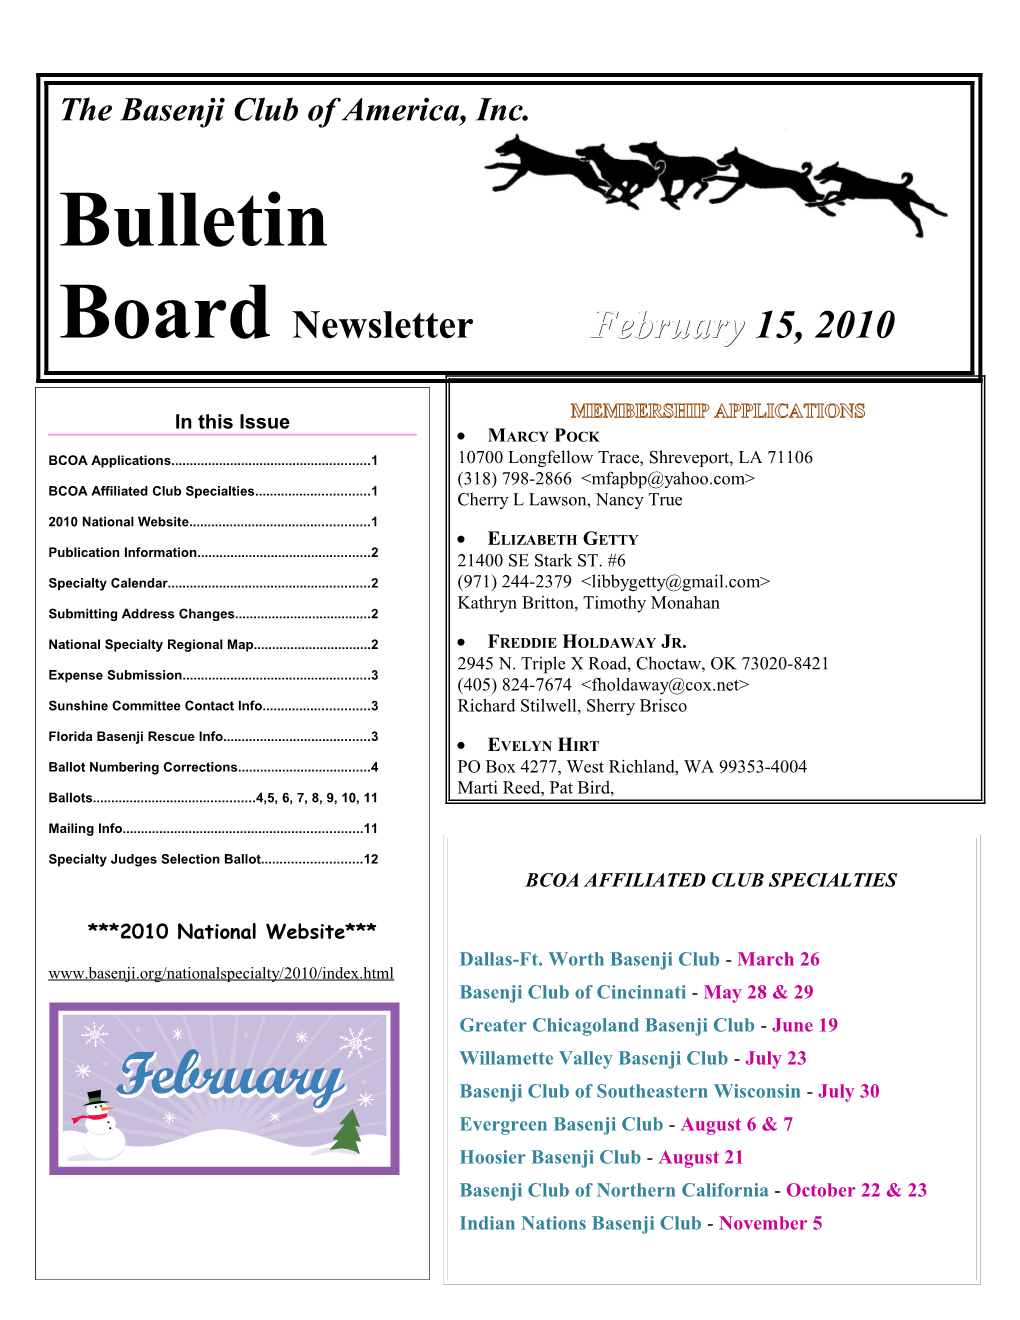 Page 2Bulletin Board Newsletterfebruary 15, 2010